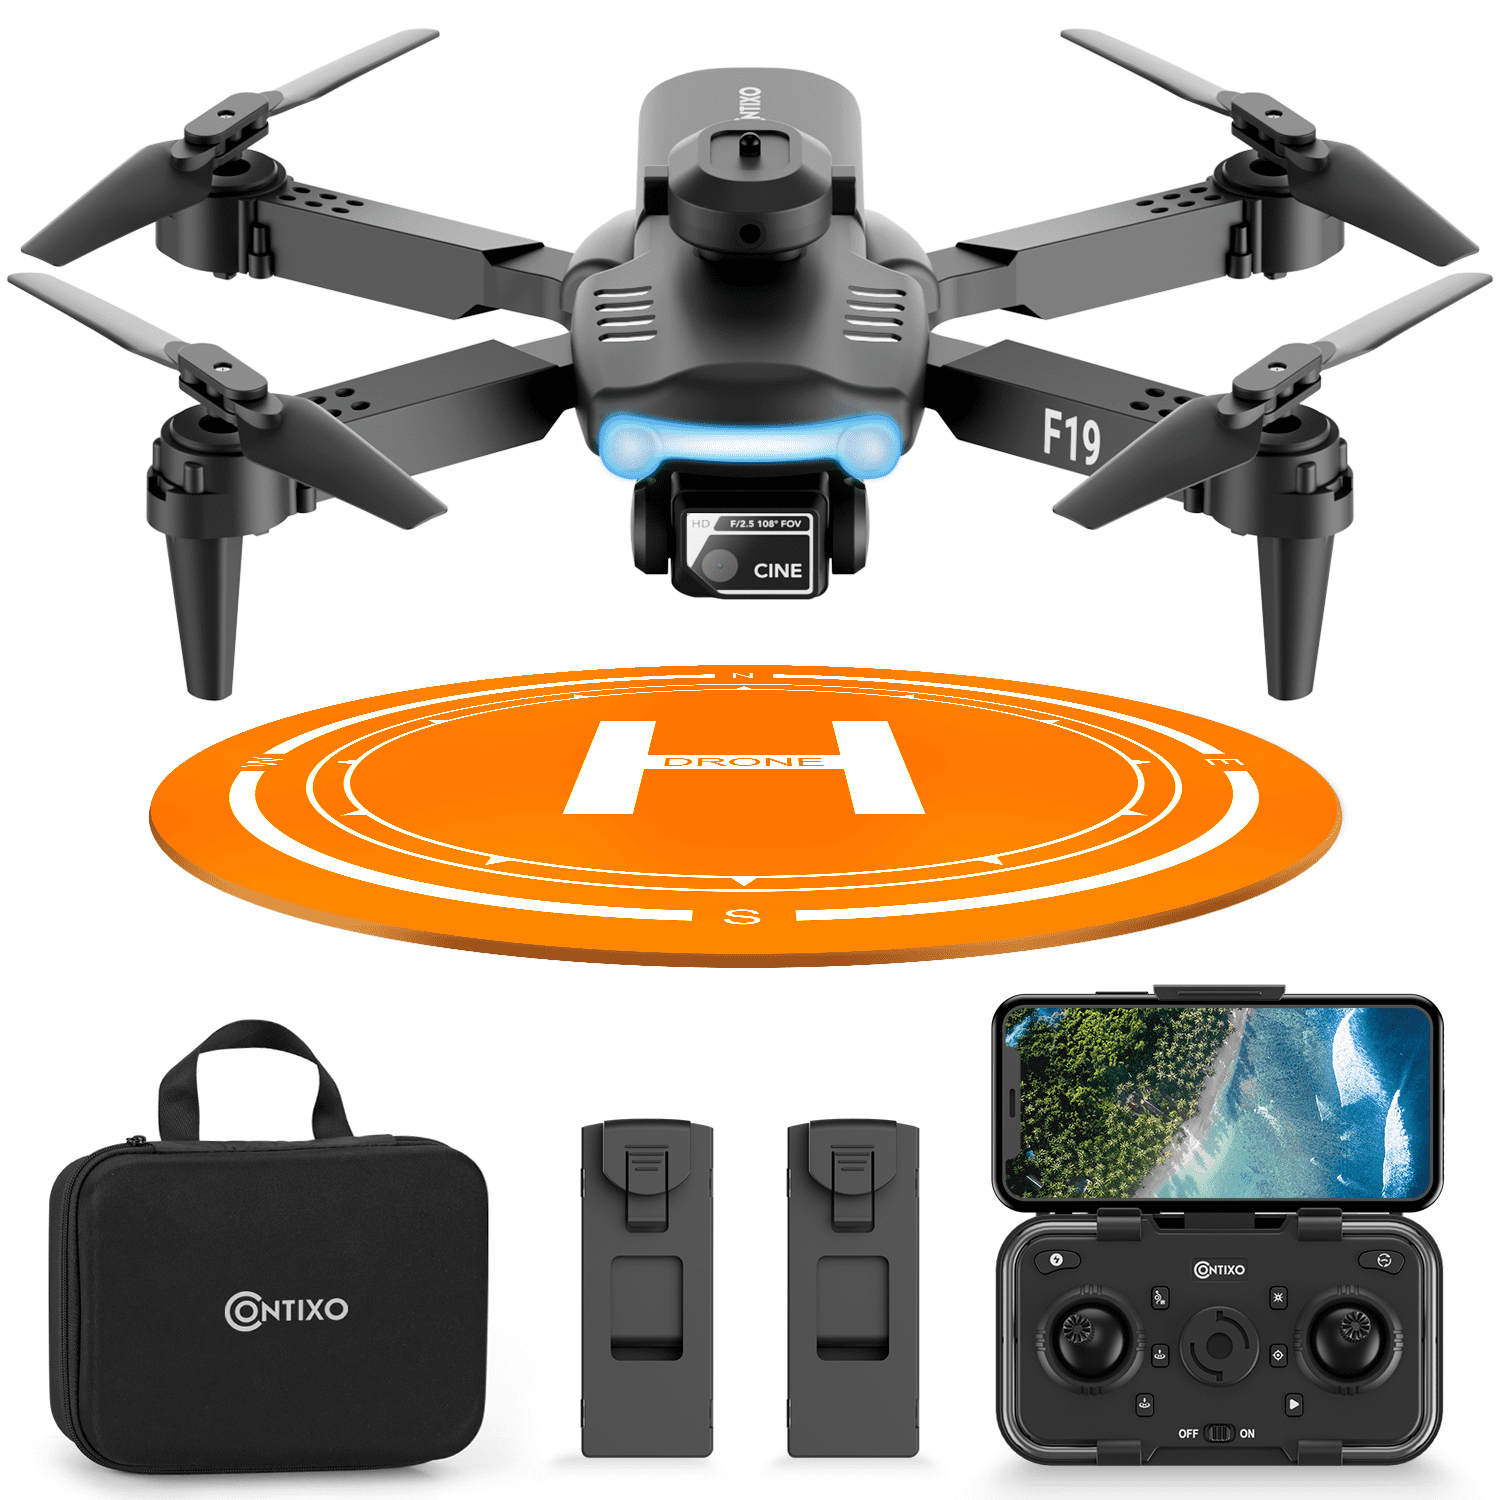 Contixo F19 drone with obstacle avoidance & camera